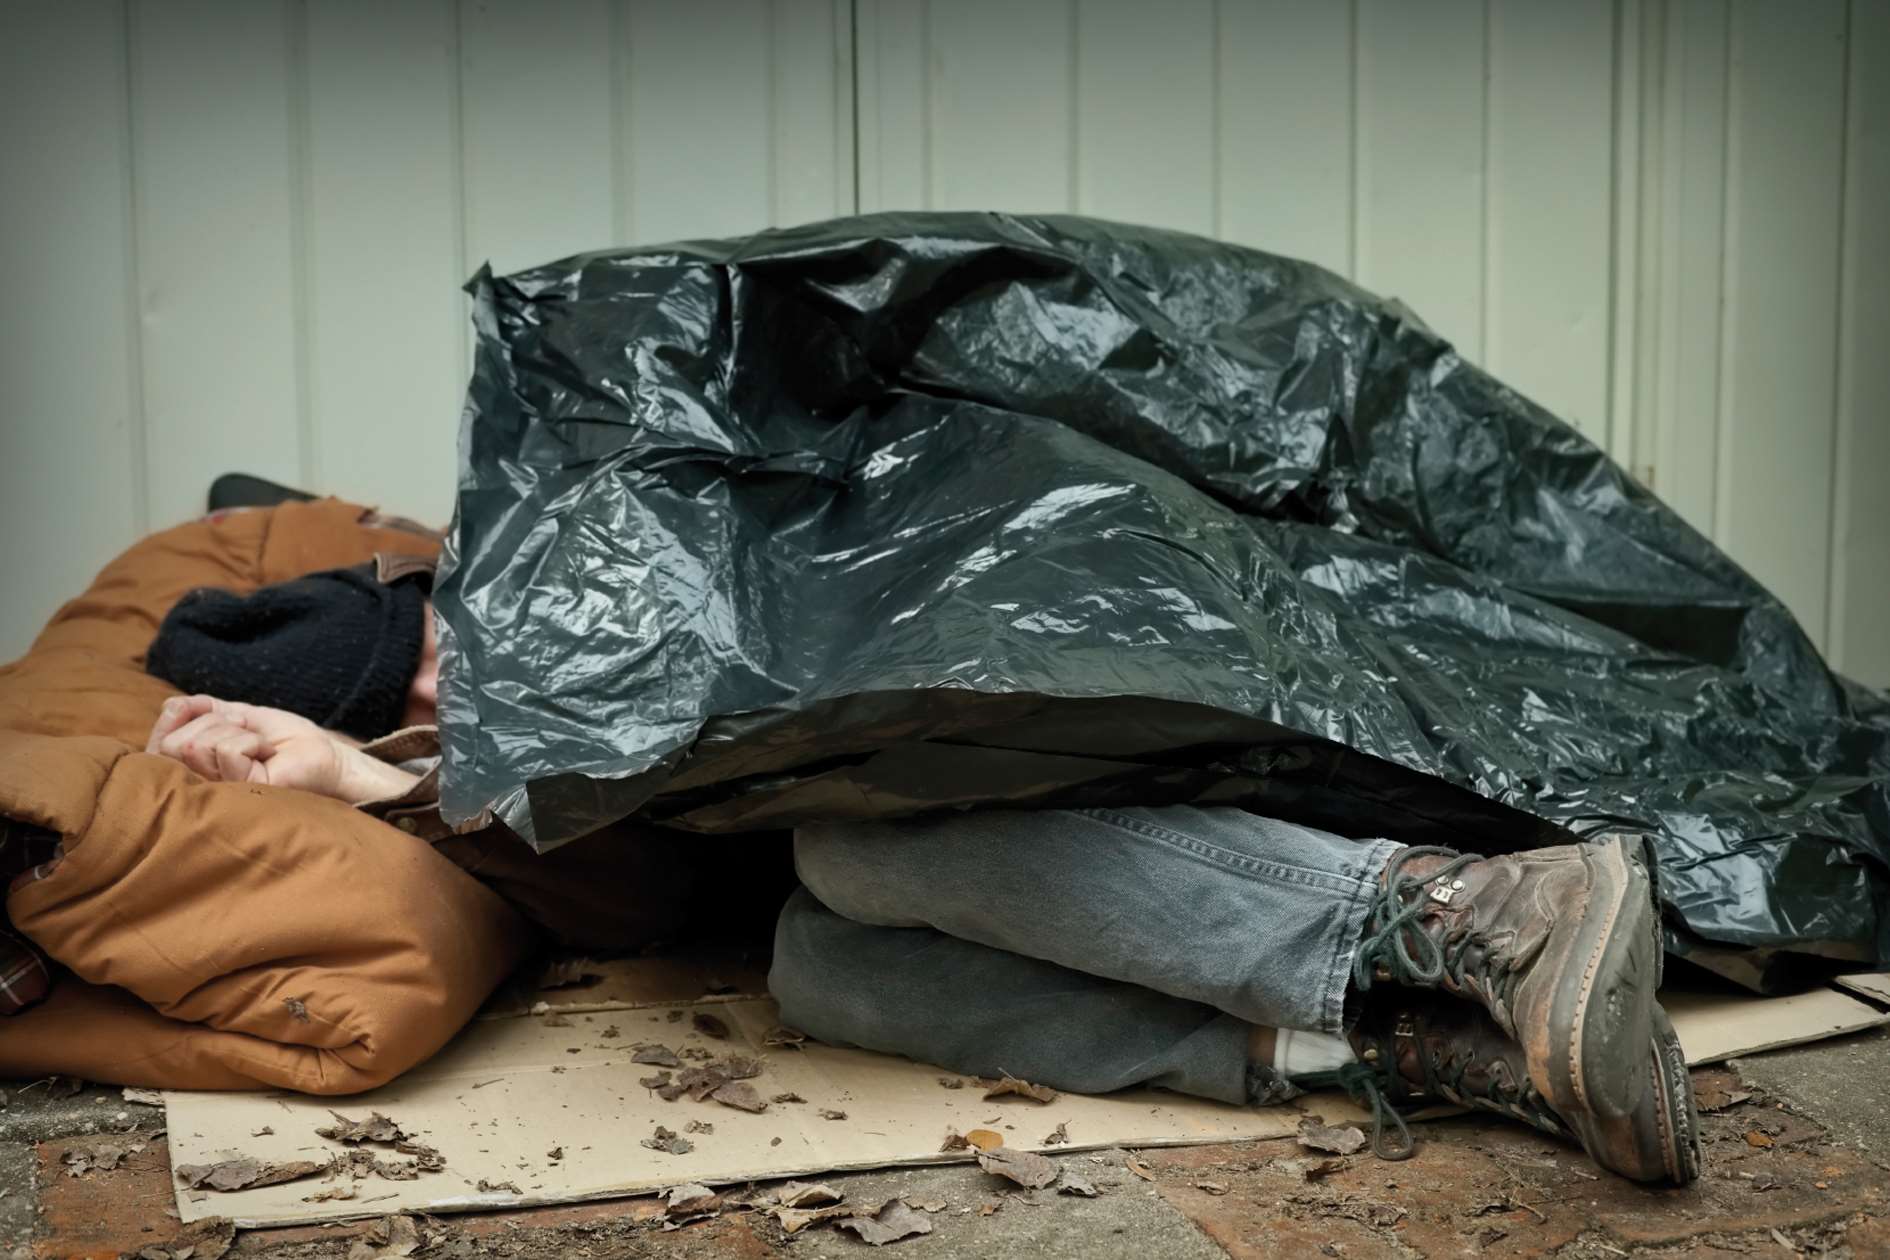 Homeless person living on street. Stock pic.